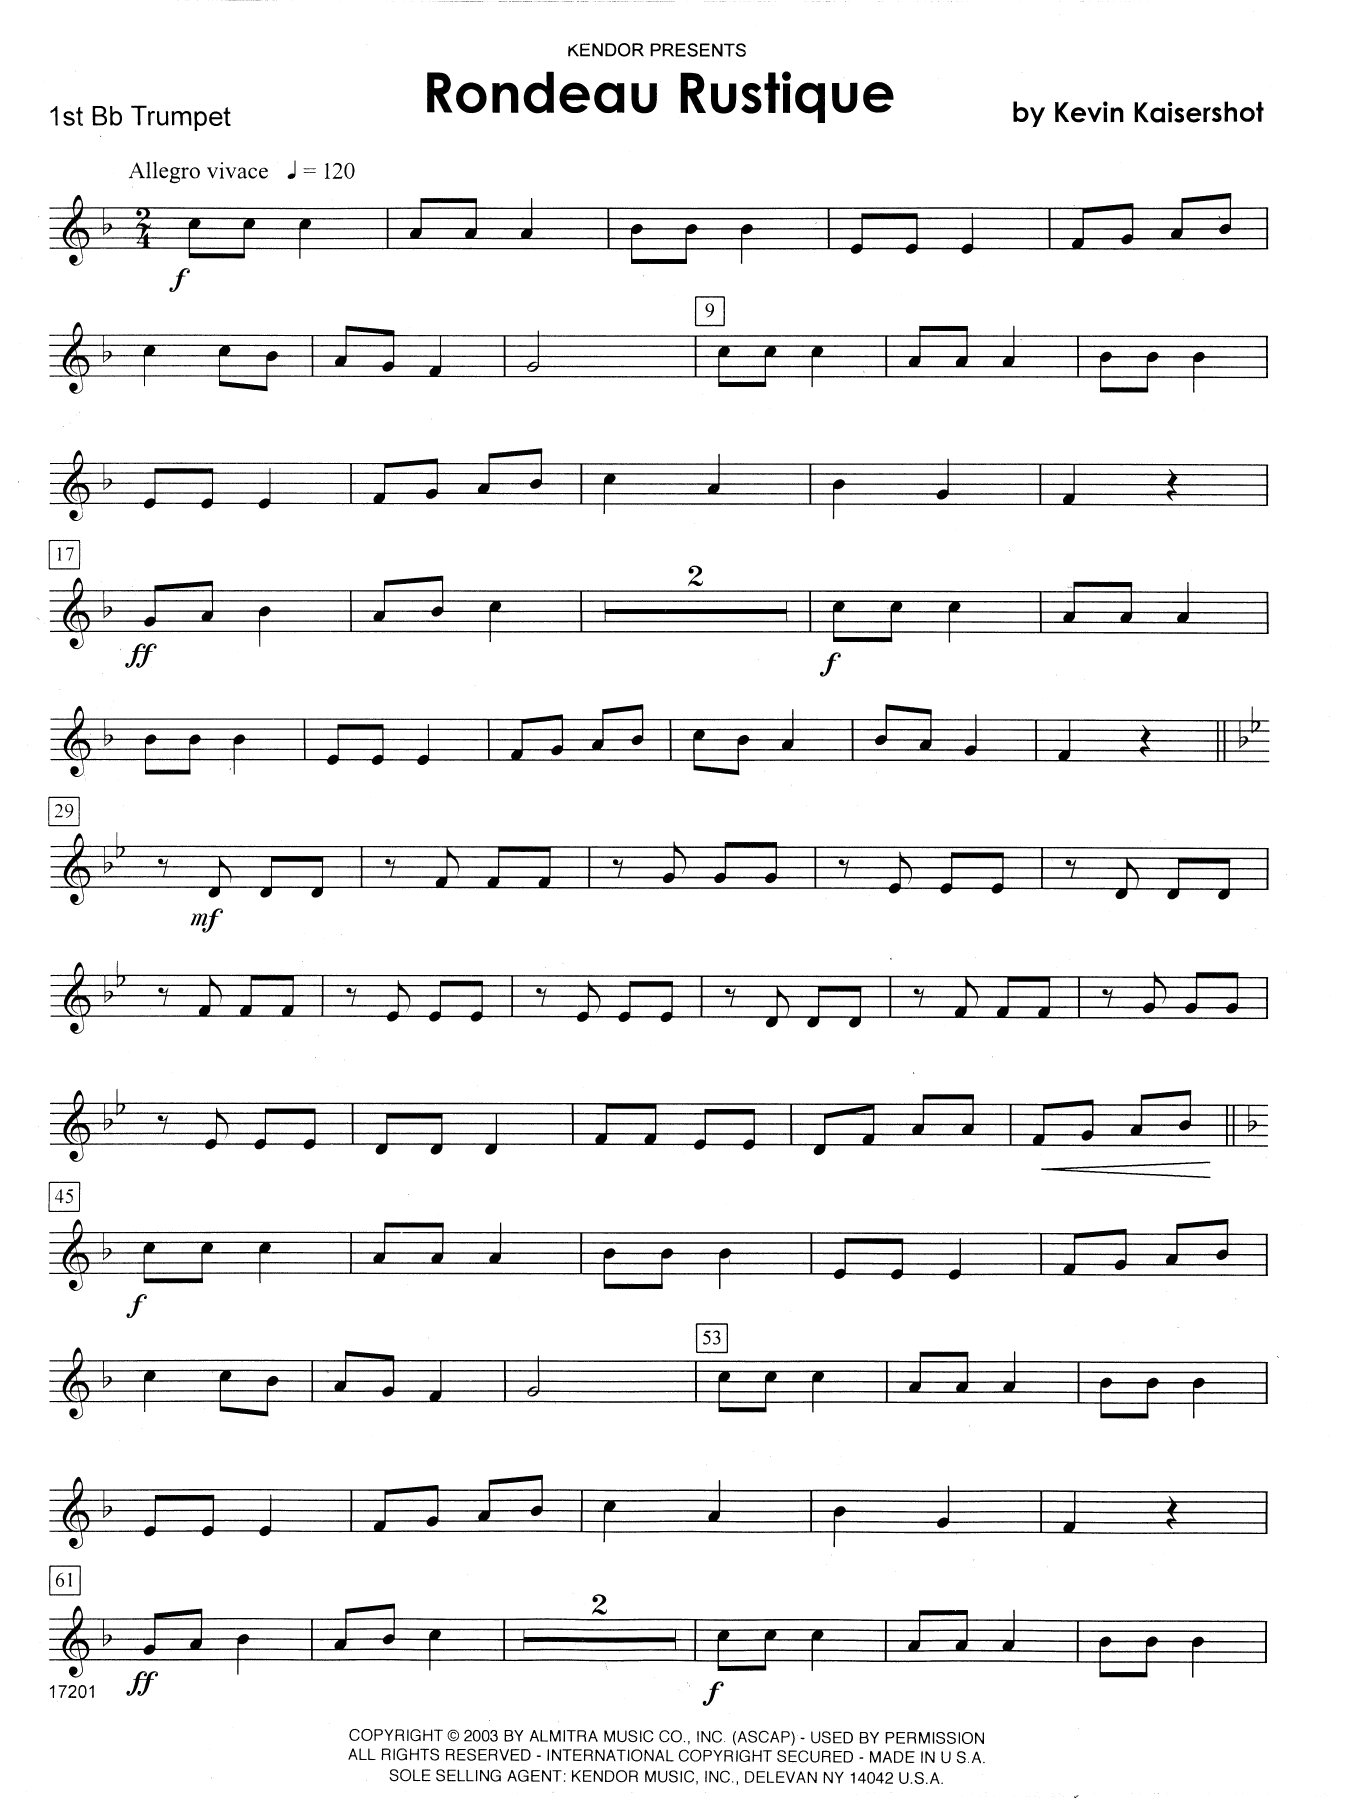 Kevin Kaisershot Rondeau Rustique - 1st Bb Trumpet sheet music notes and chords. Download Printable PDF.